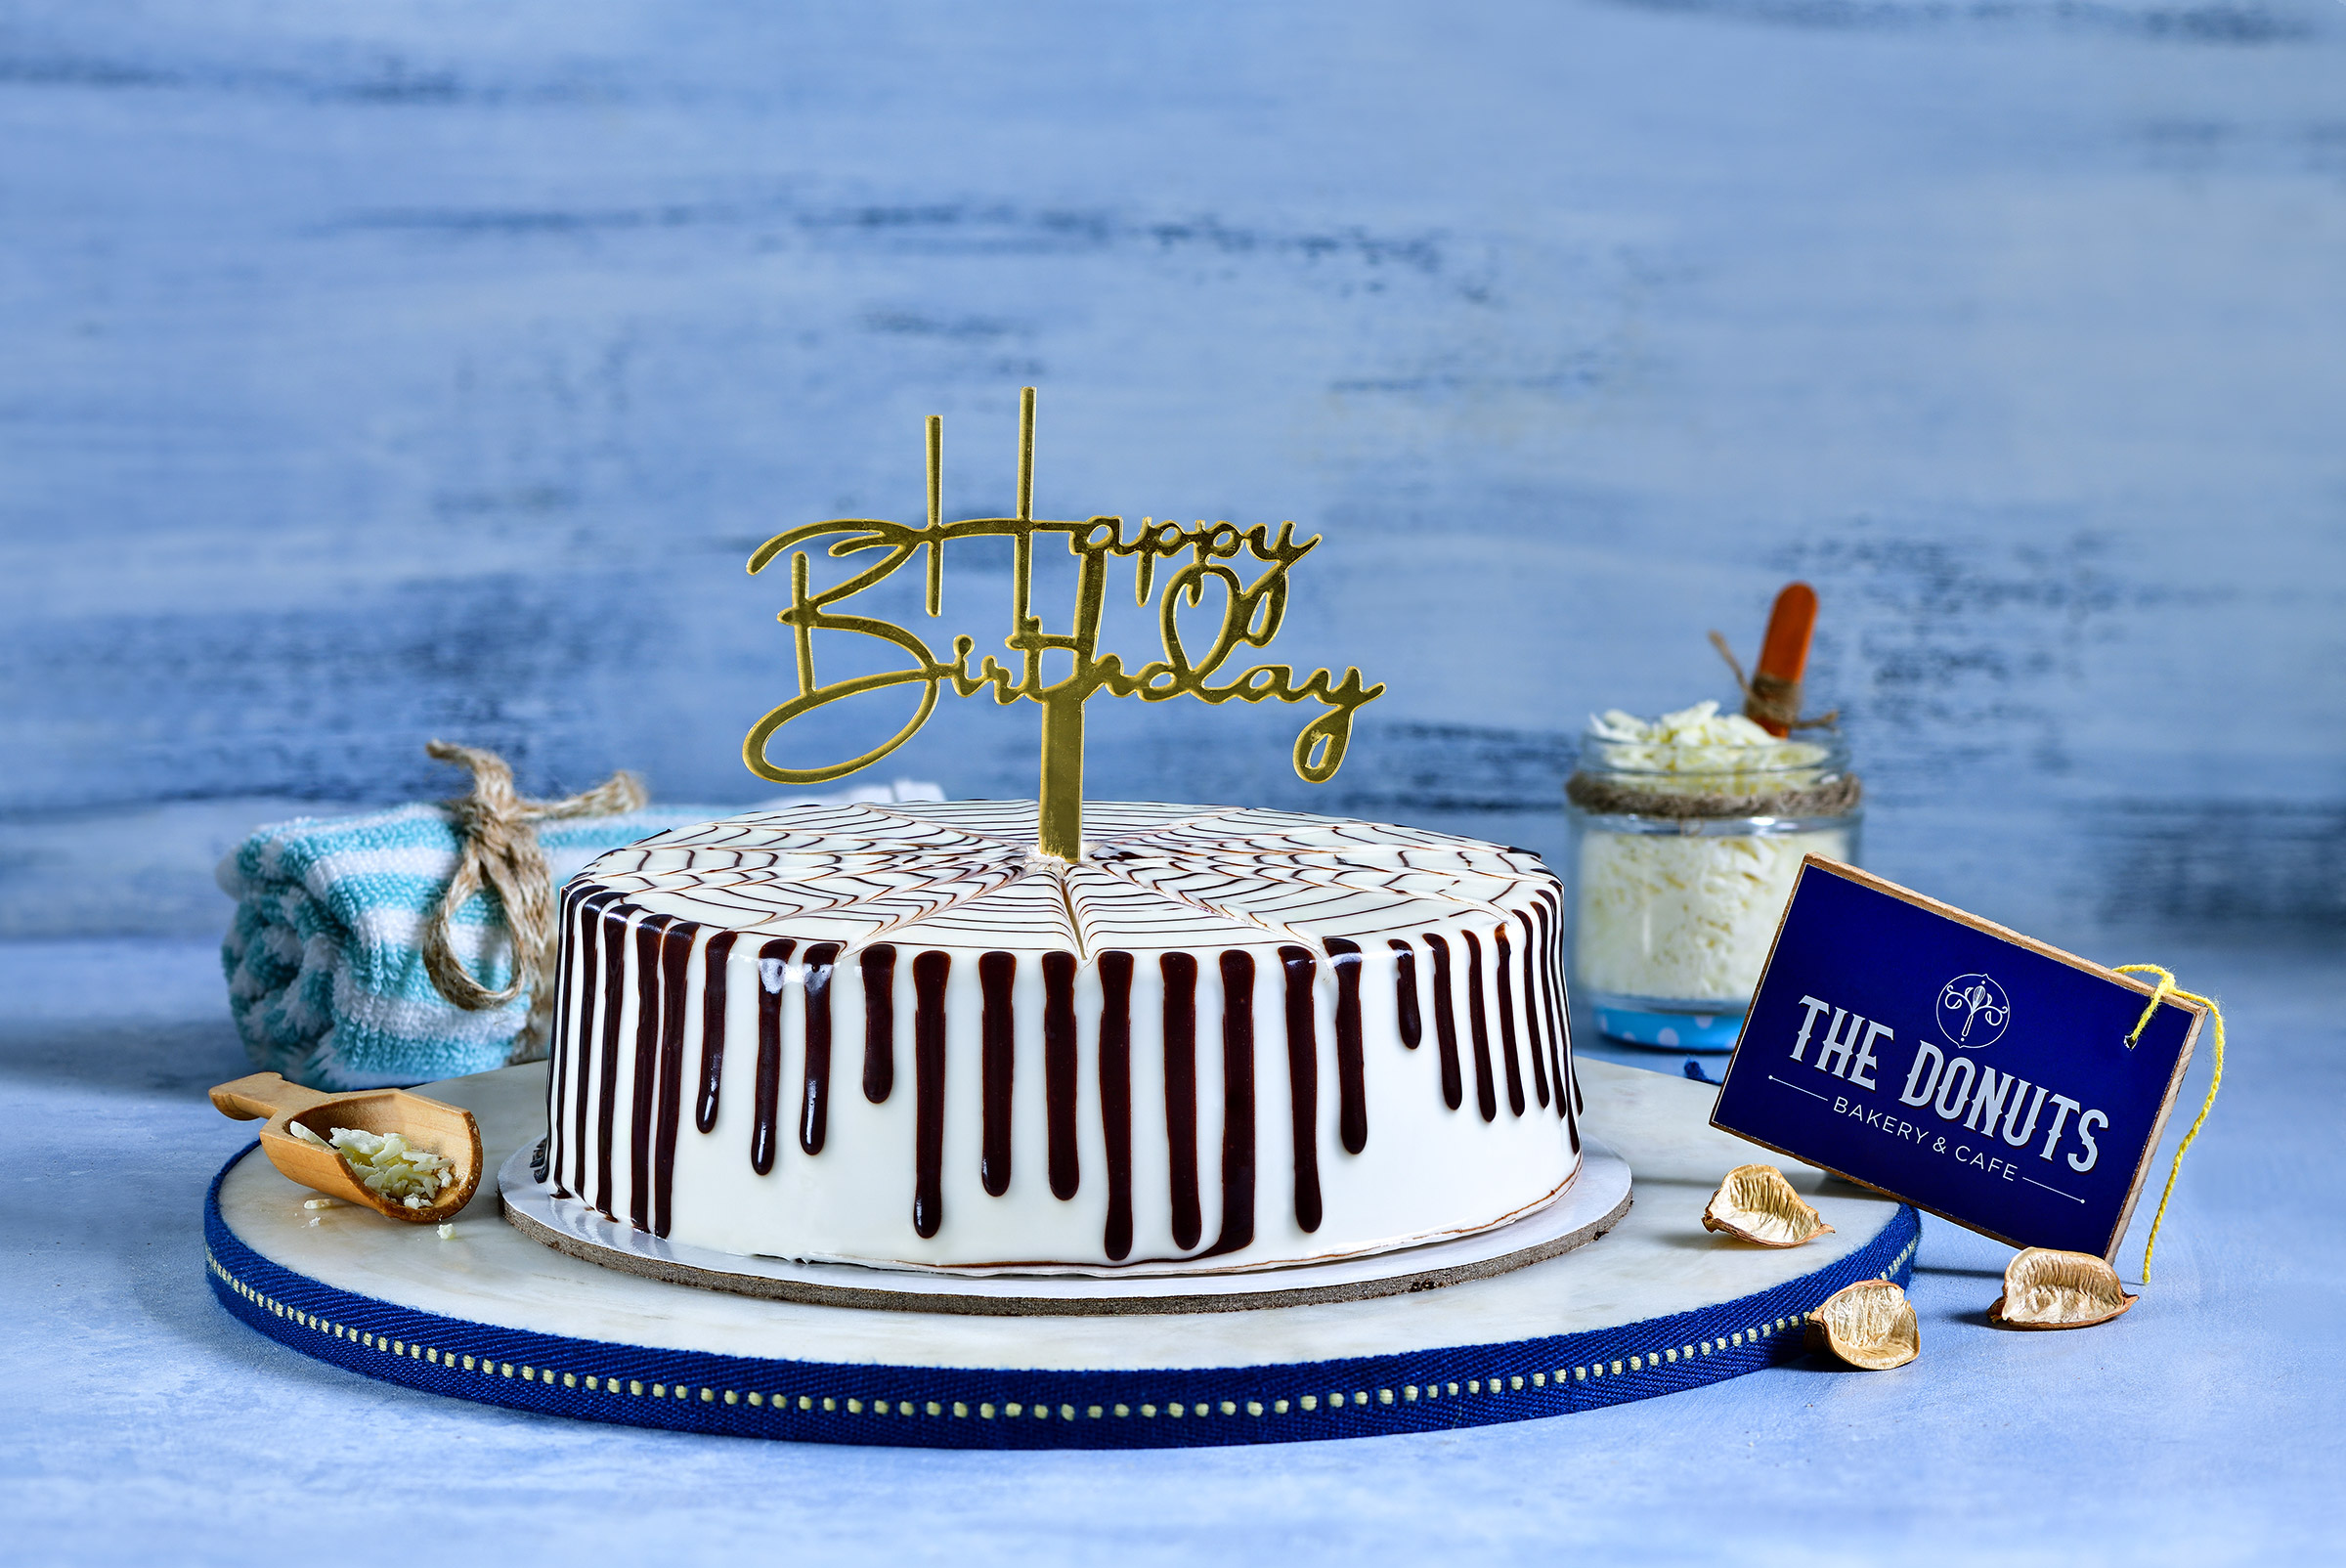 Buy Choco Bliss Cake| Online Cake Delivery - CakeBee